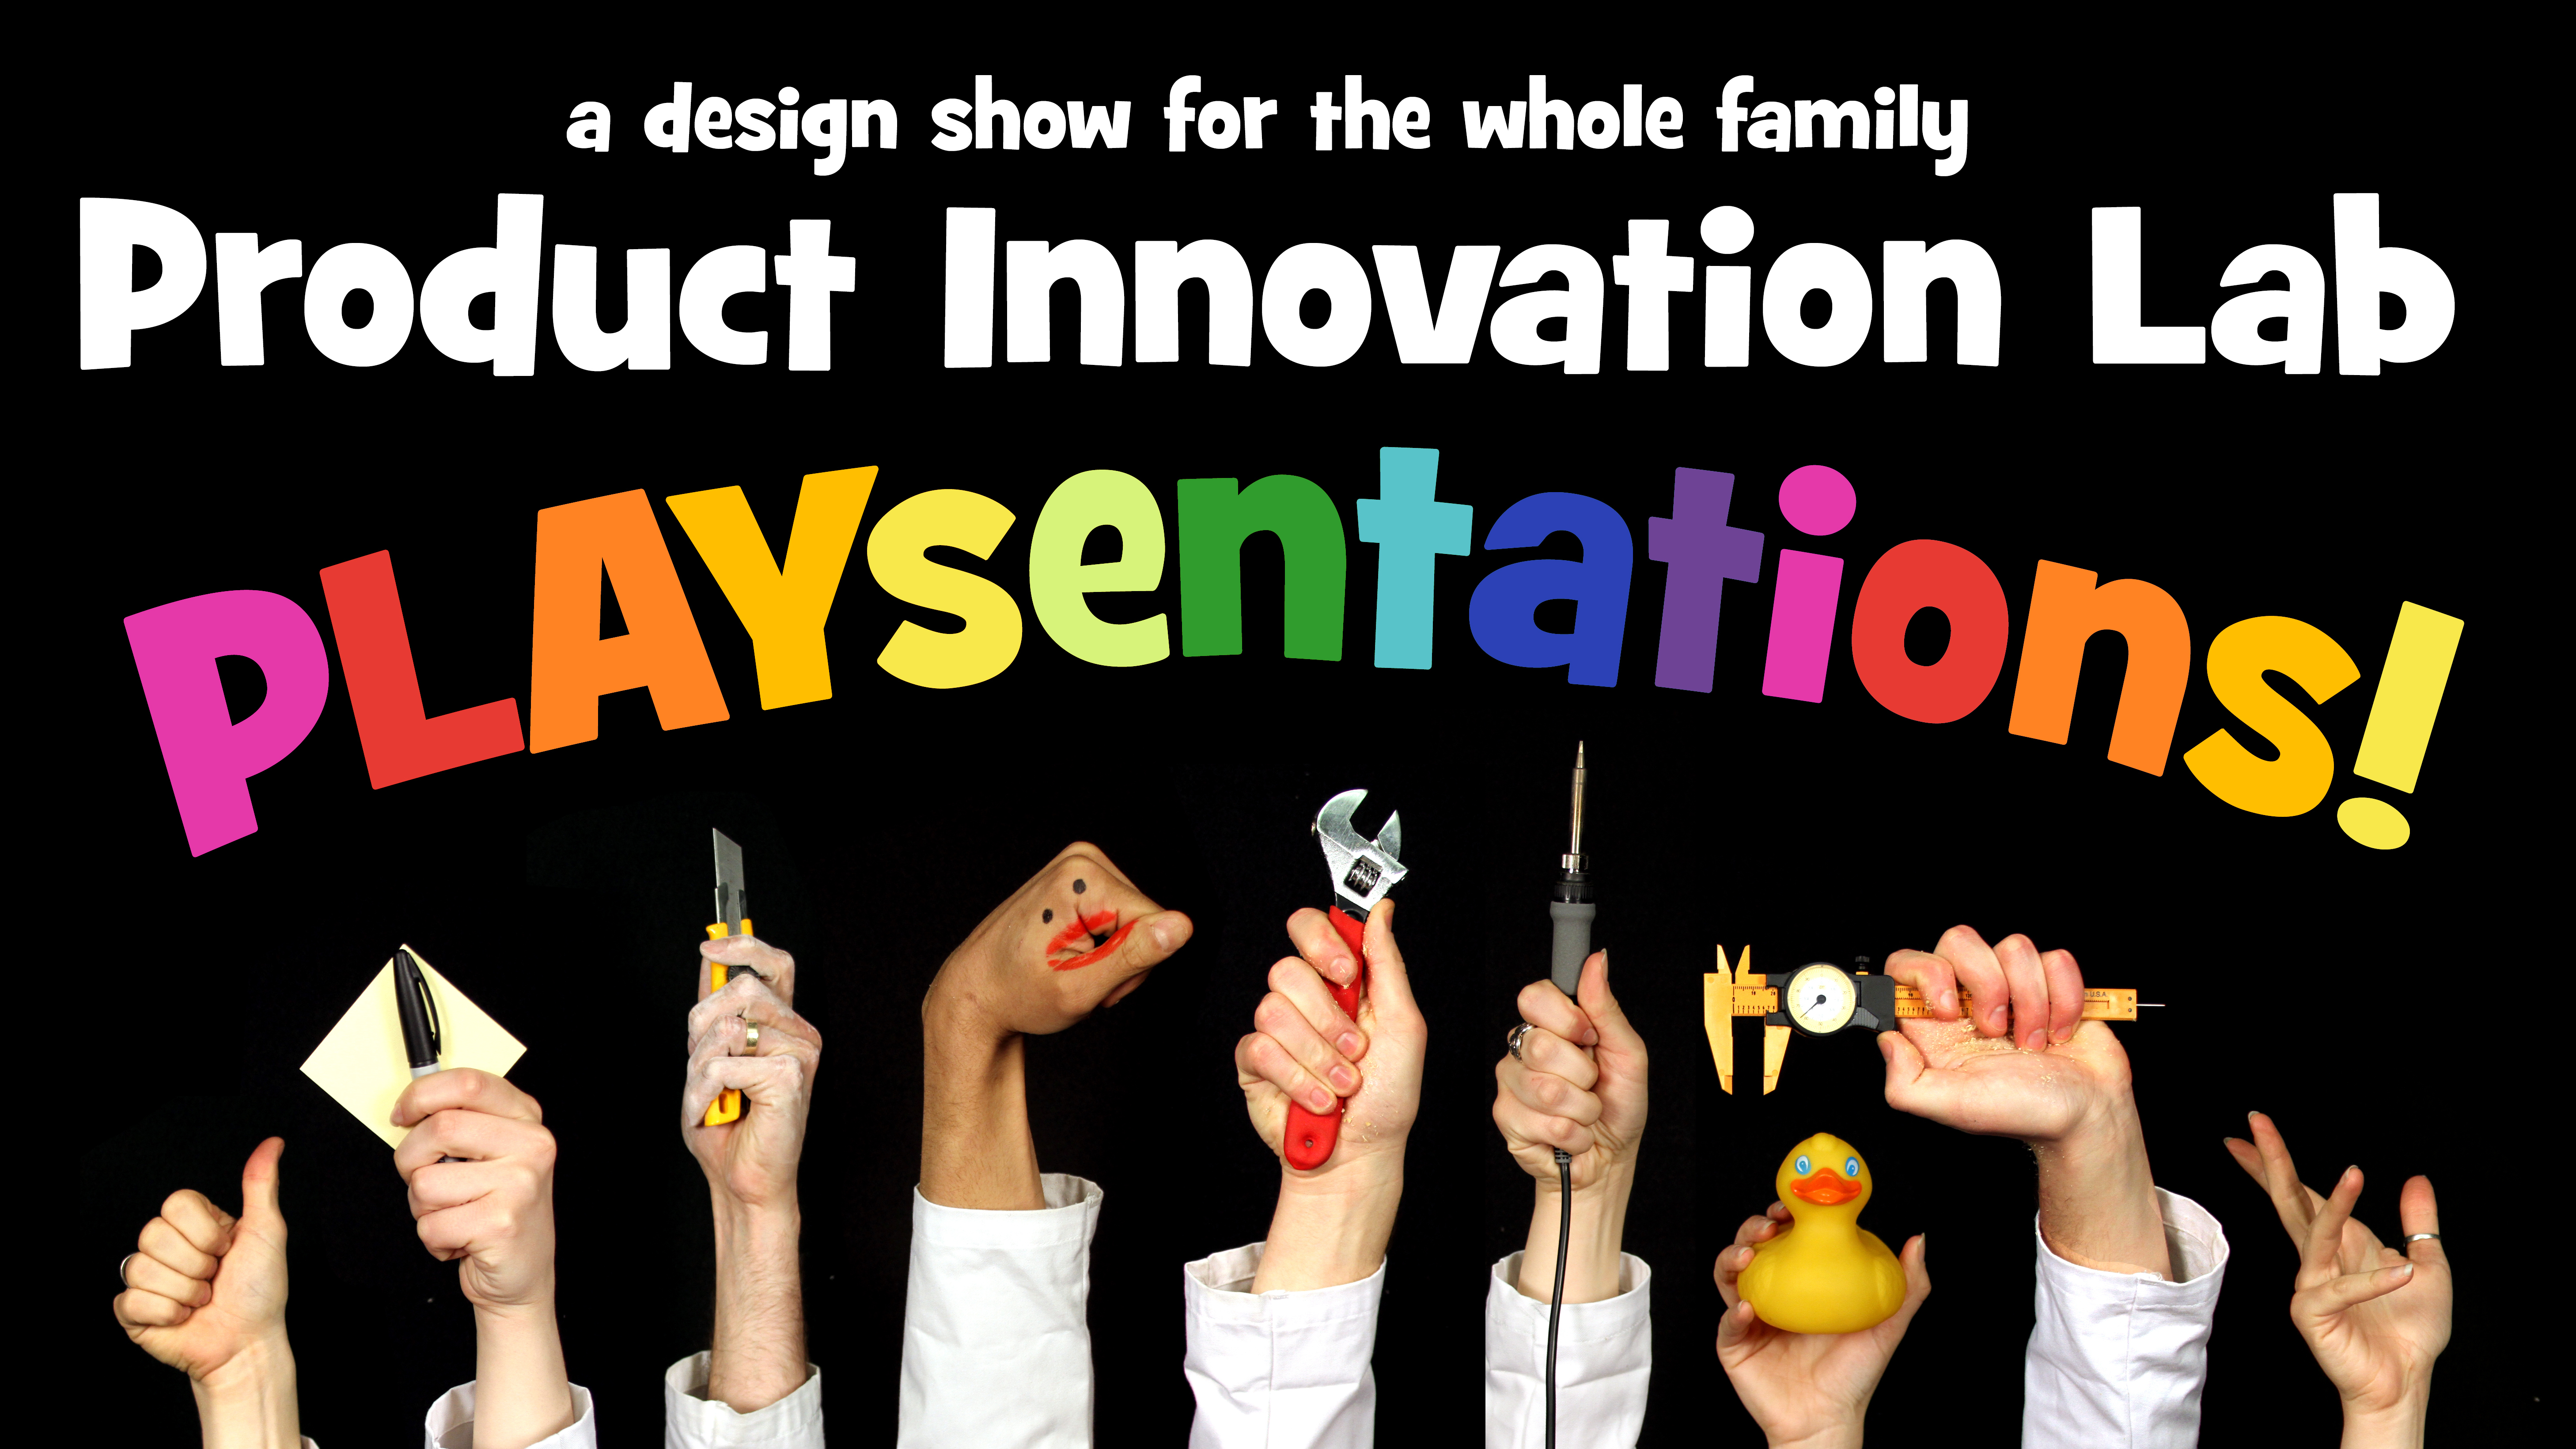 Product Innivation Lab PLAYsentations